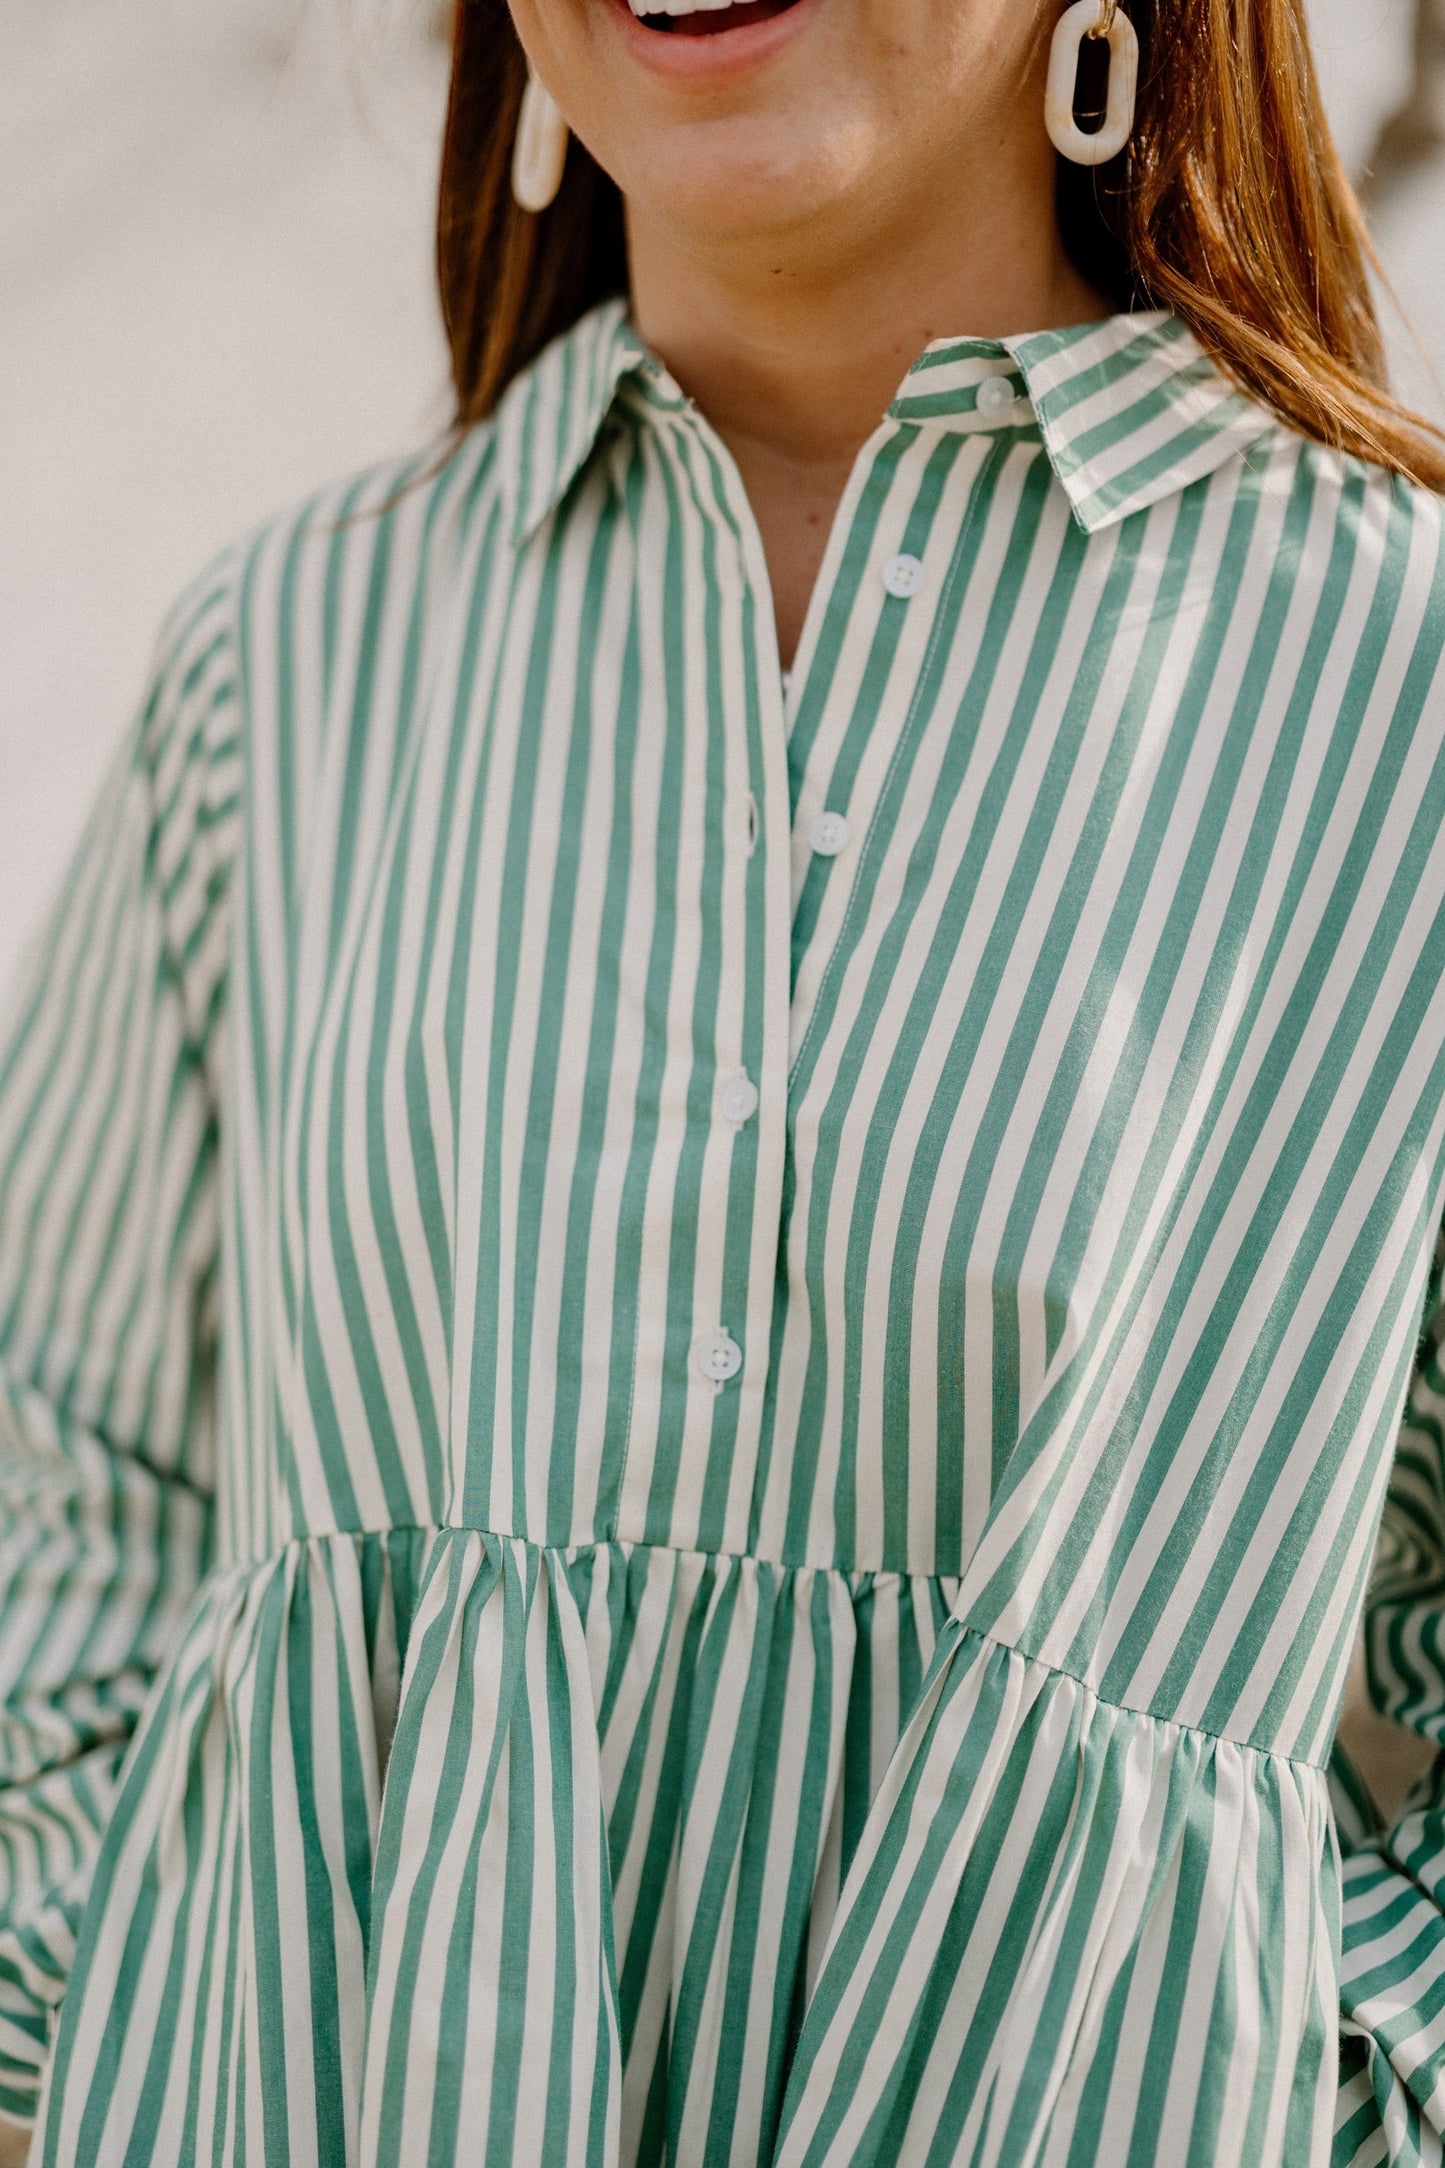 Aleesha Swing Dress in Green Cabana Stripes by Able Clothing